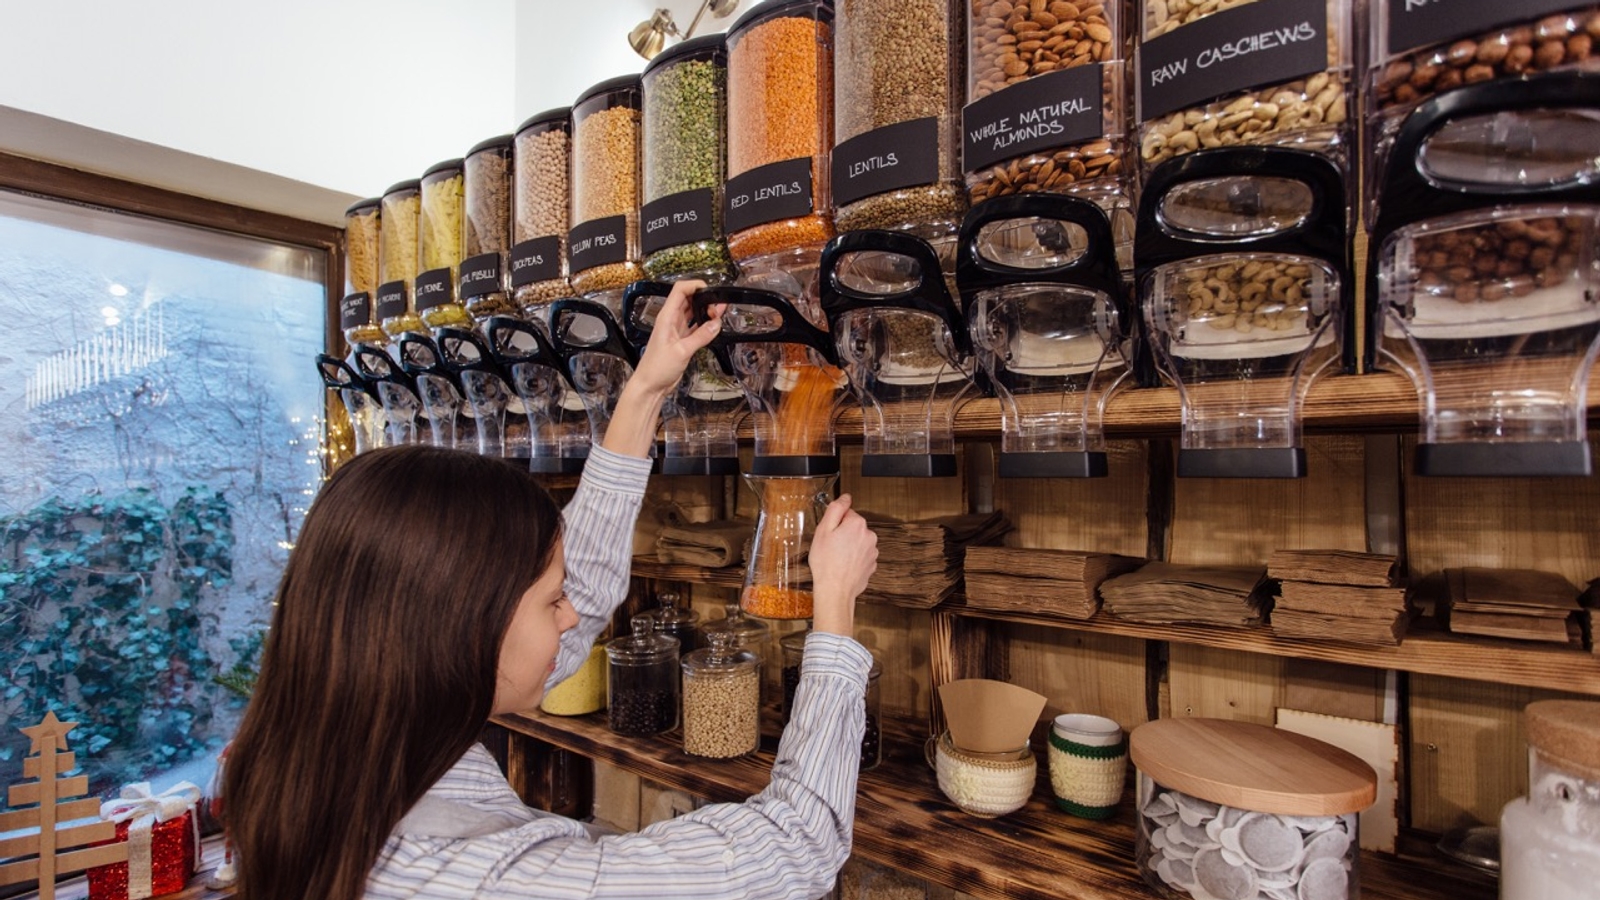 A photo of someone filling a container in a refill shop